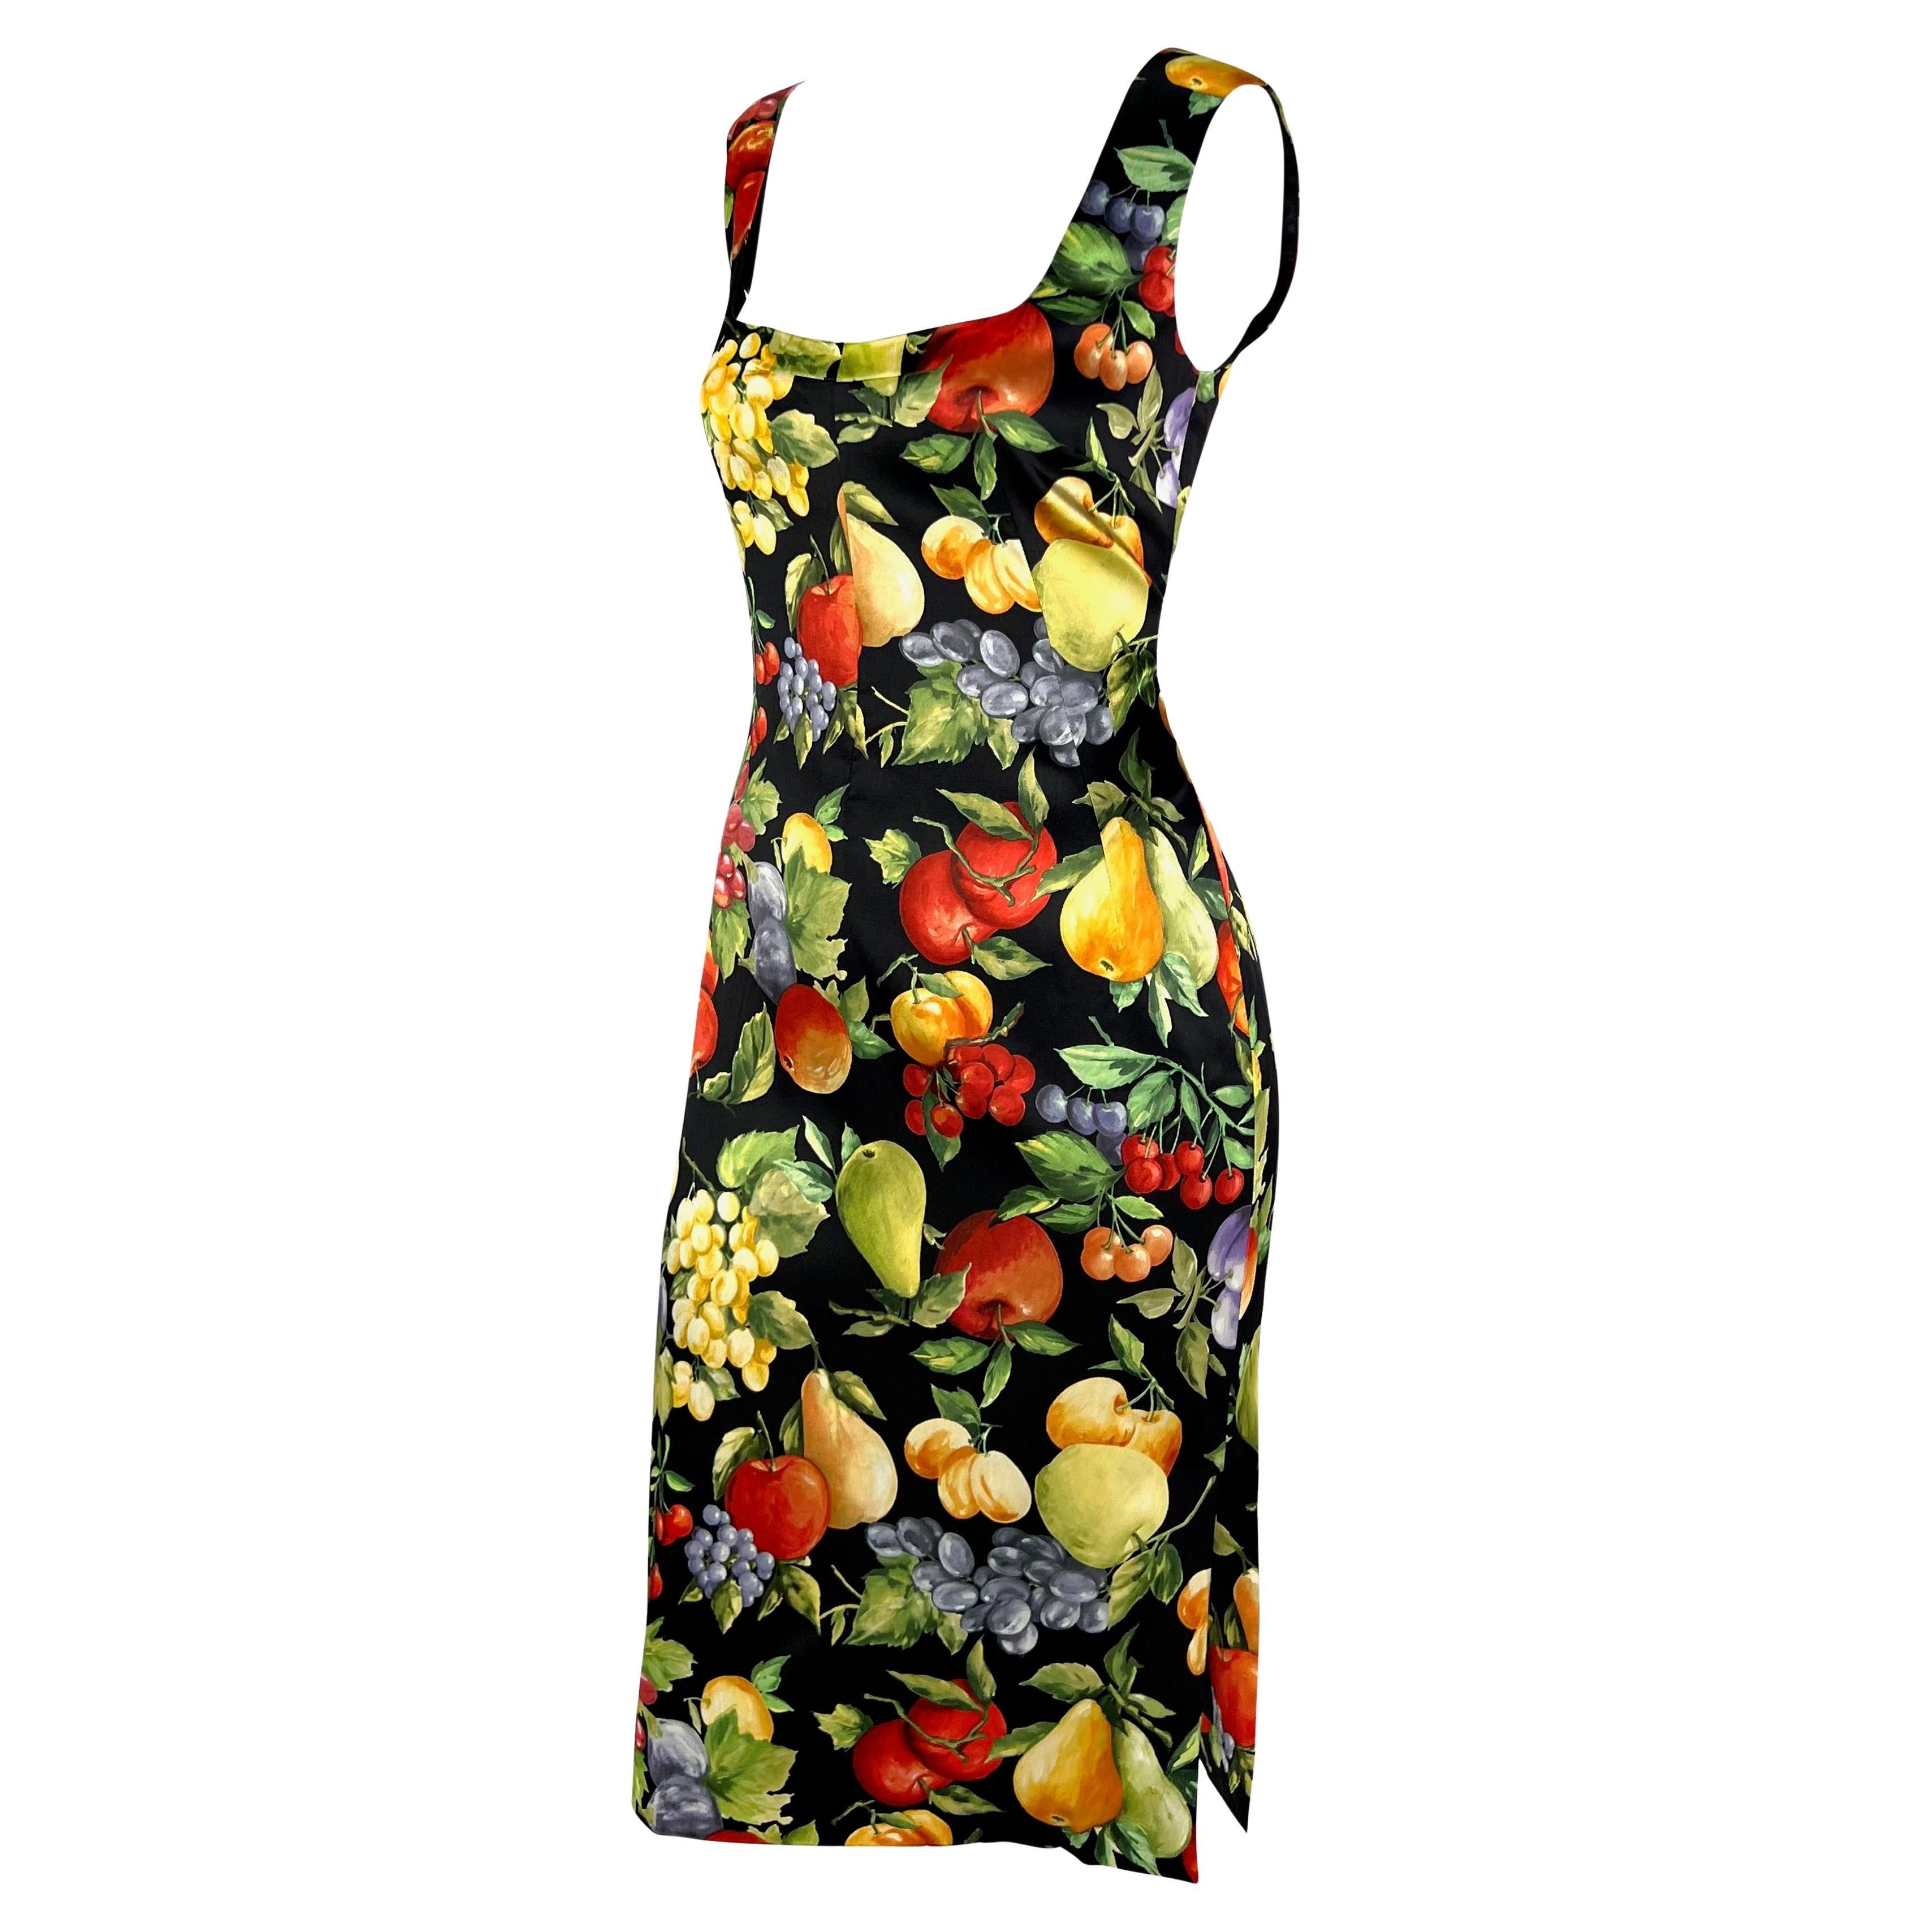 2000s Dolce & Gabbana Black Bodycon Sleeveless Fruit Print Pin-up Dress In Excellent Condition For Sale In West Hollywood, CA